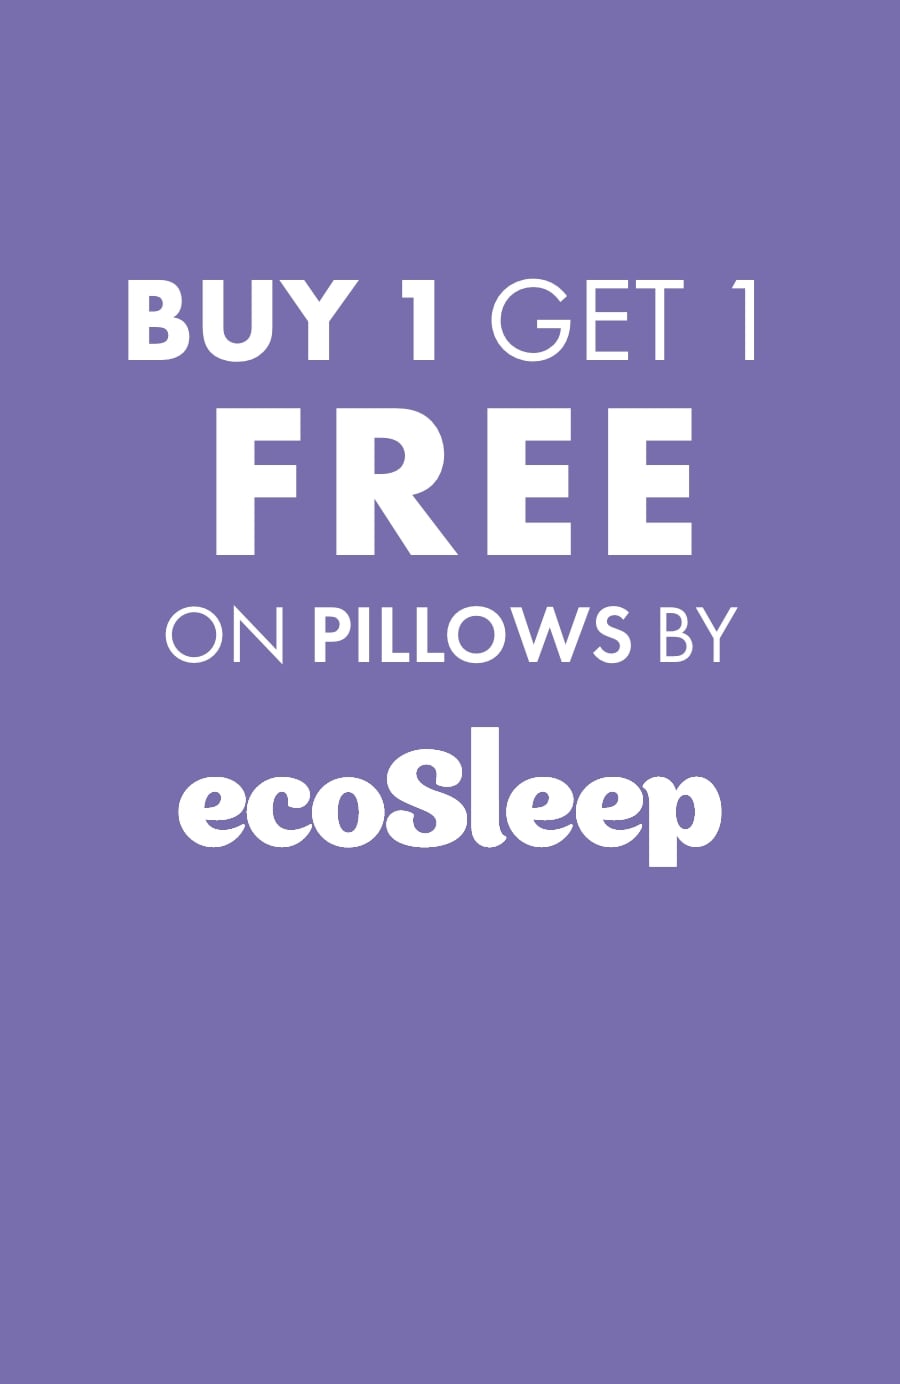 Buy 1 get 1 FREE on Pillows by ecosleep